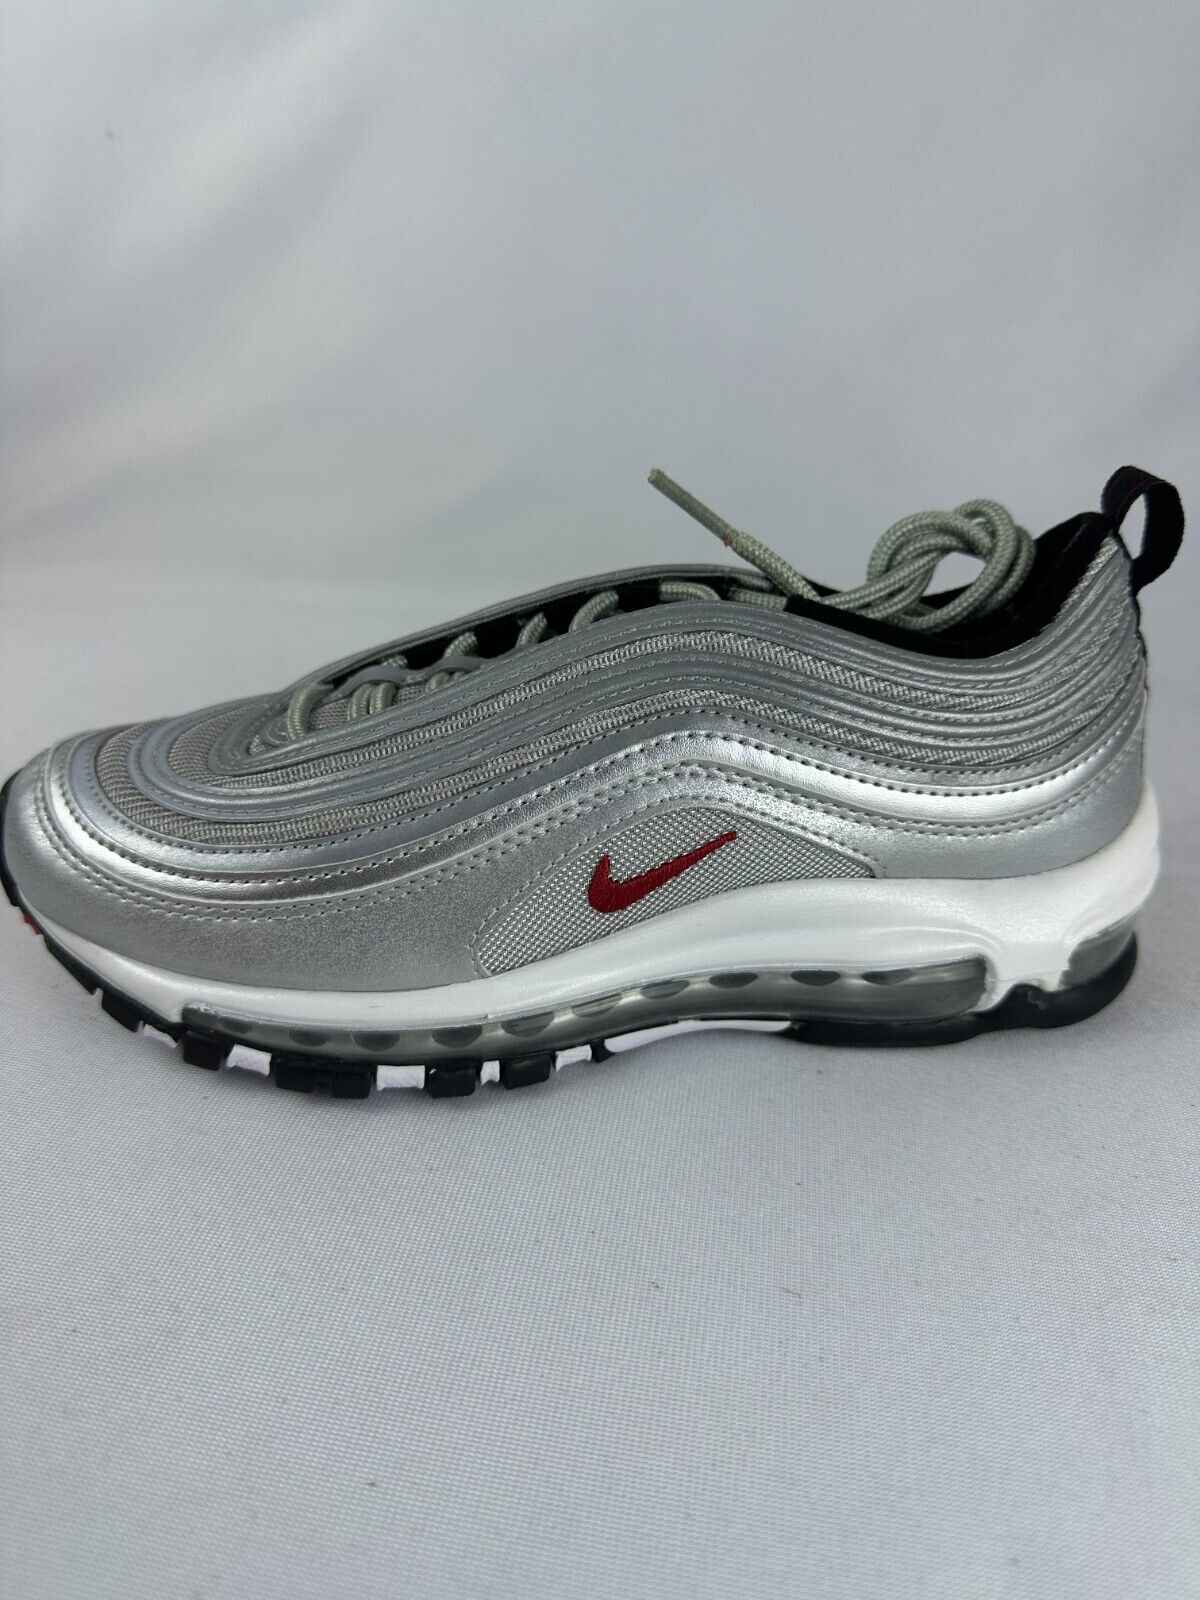 Nike Youth 5Y Air Max 97 OG QS Silver Bullet Running Shoes 